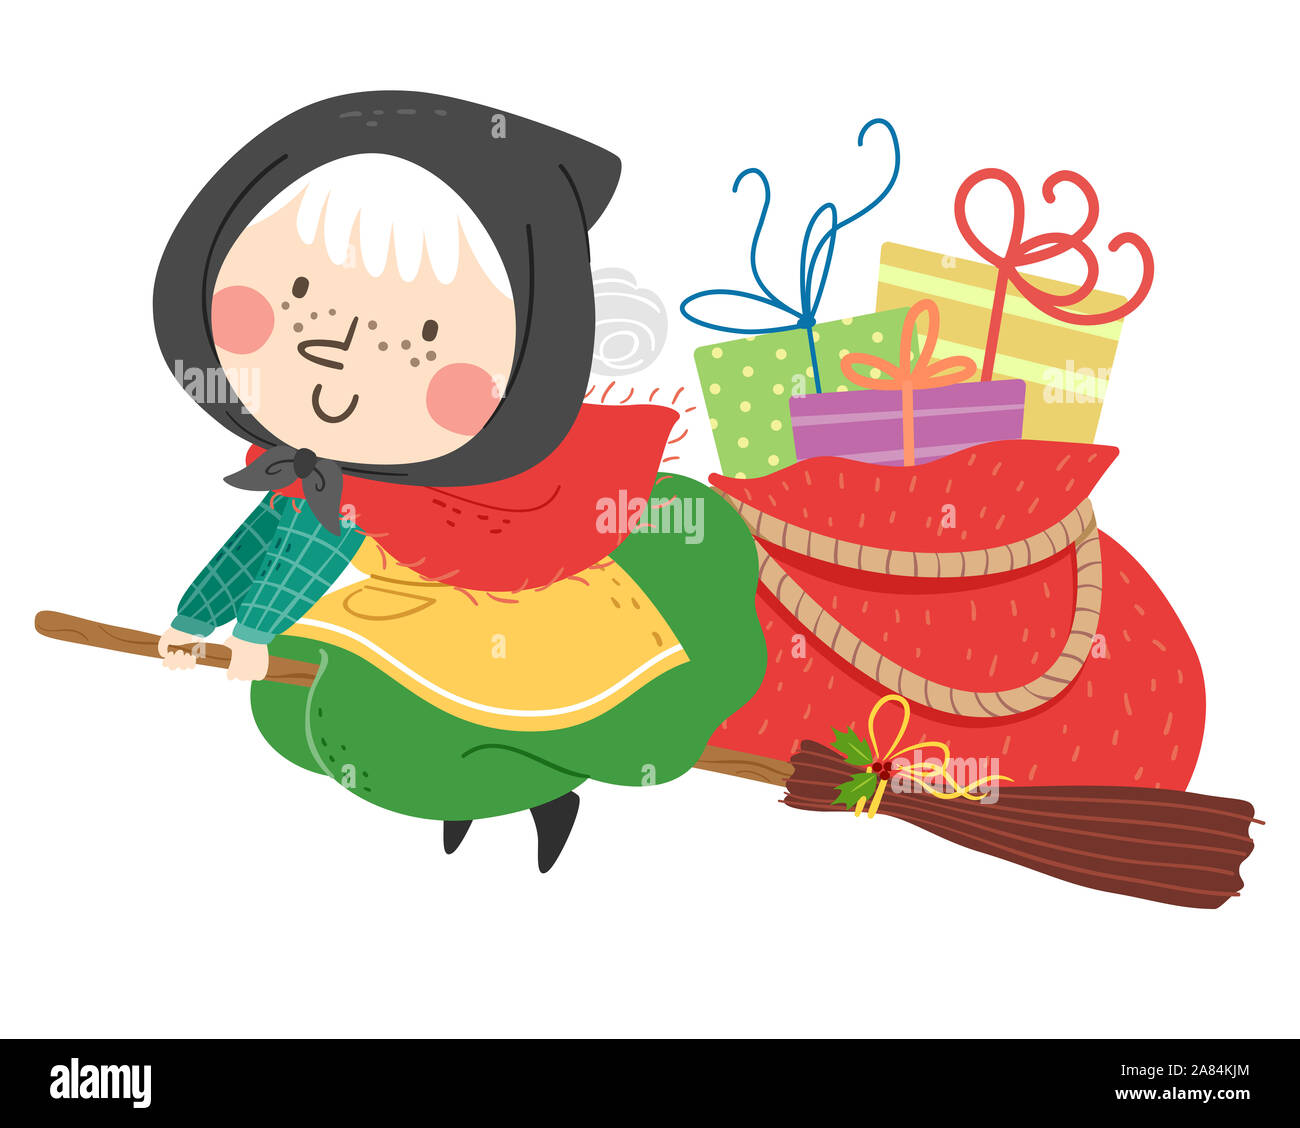 Illustration of an Old Witch Flying and Riding a Broom with a Bag Full Gifts for Christmas Stock Photo